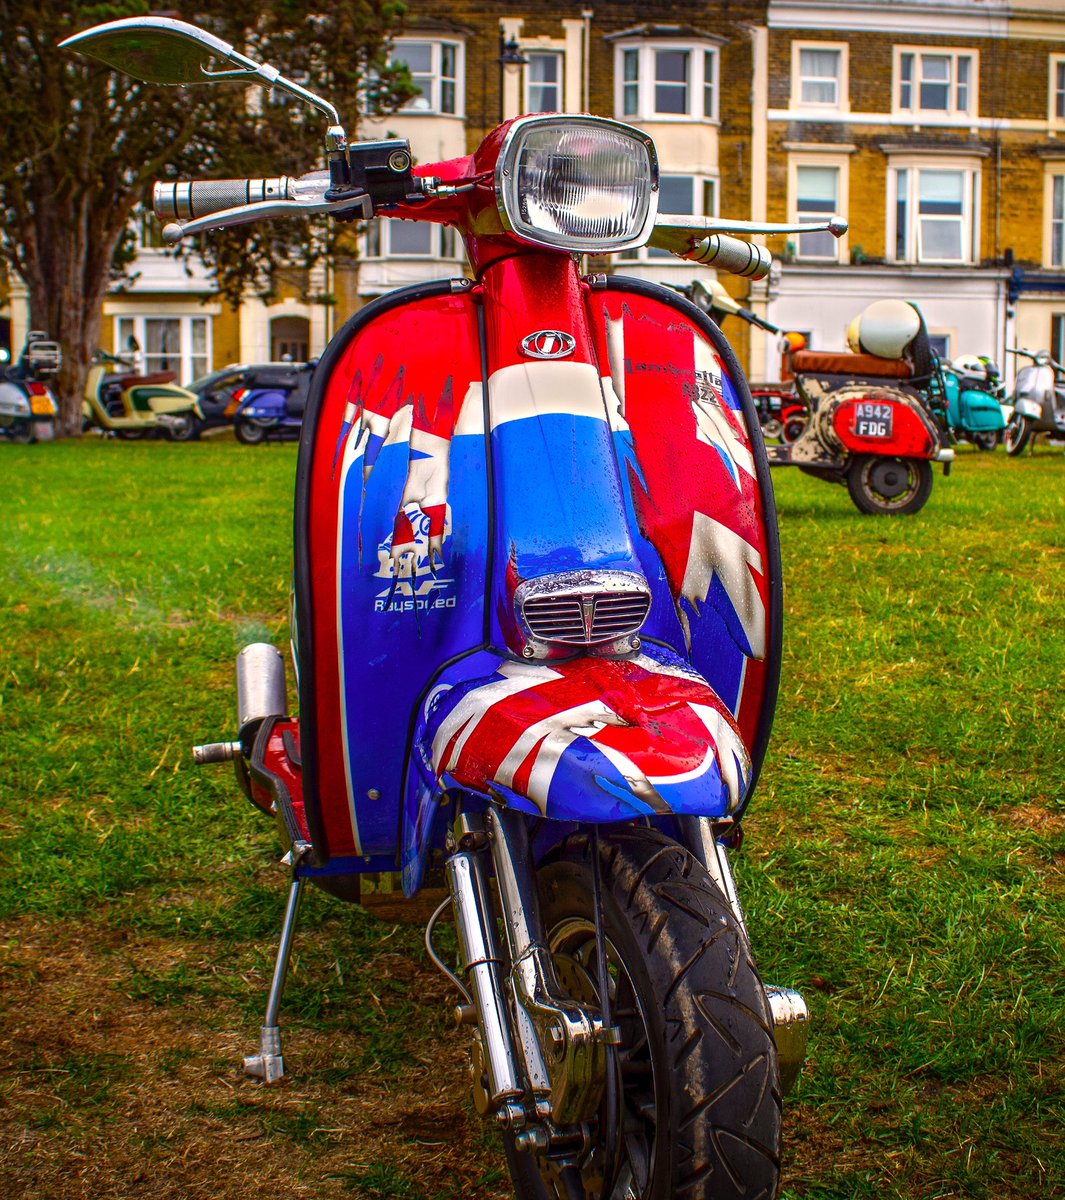 This pic was taken at #iow2018 #lambretta #isleofwightscooterrally2018 #unionjack #customscooter #customscoot #rayspeed #afrayspeed @streetsigns0